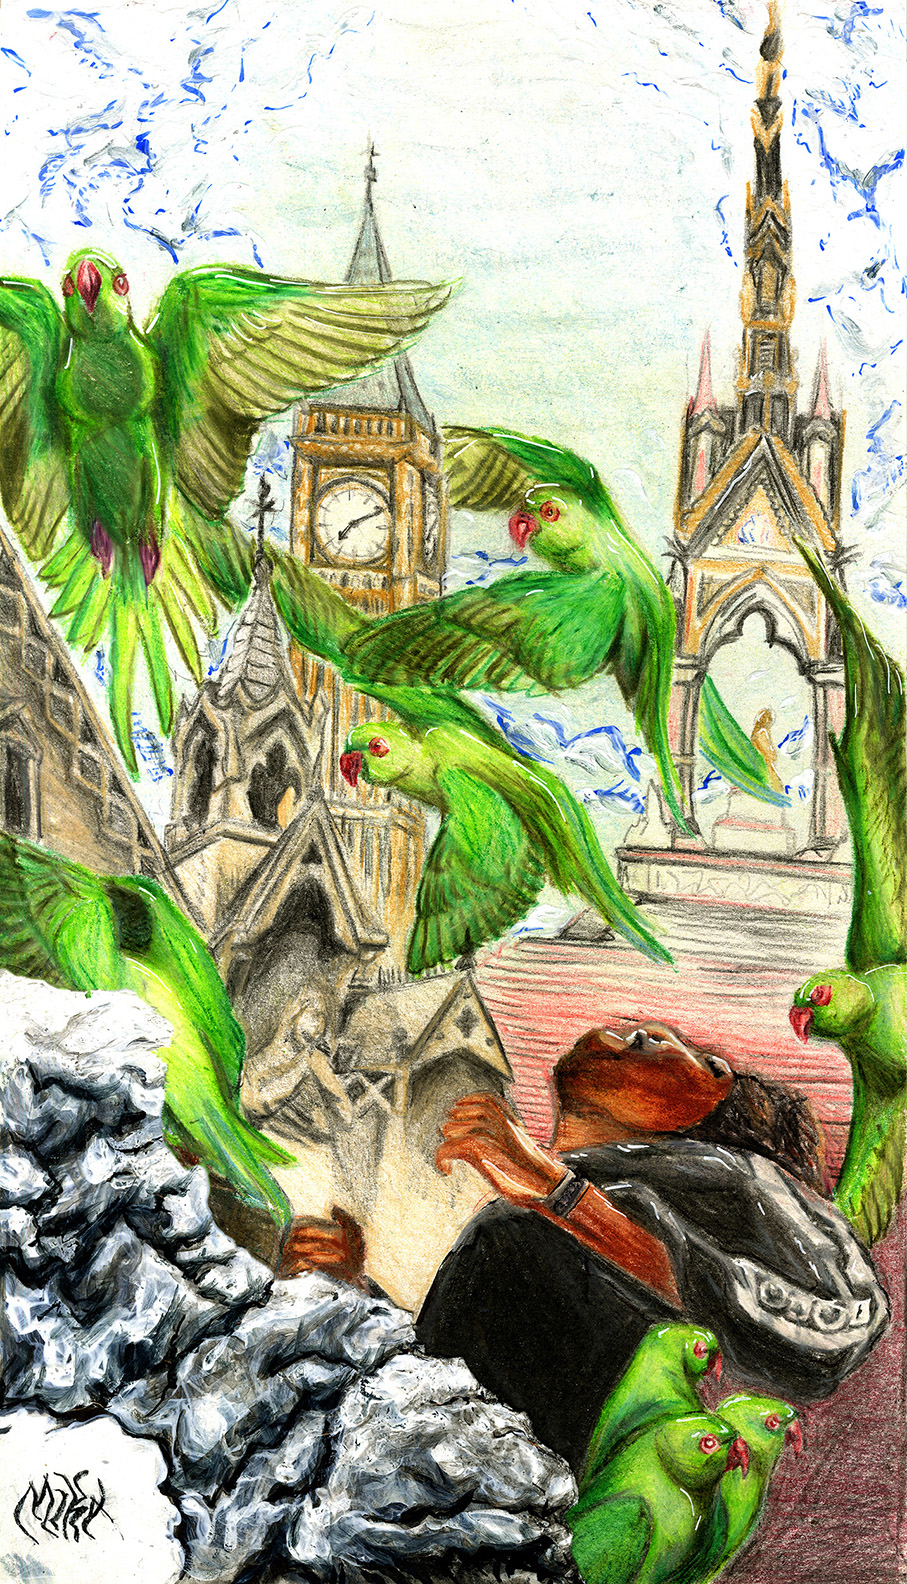 Hand drawn image in colored pencil showing historical buildings with green parrots flying in different directions in front. A figure is seen on the lower right and they seem as if they are falling backward into the scene.